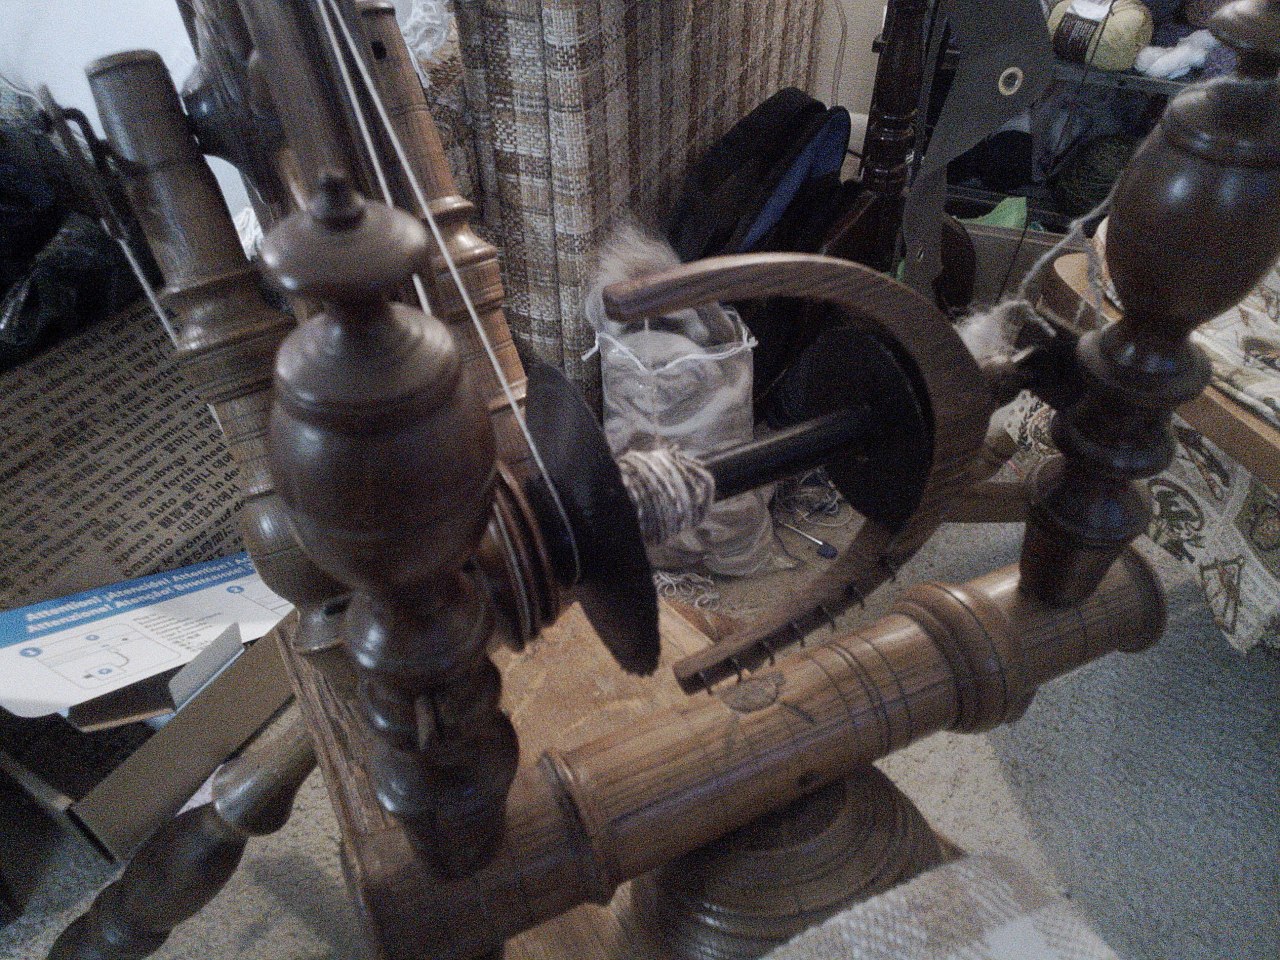 My spinning wheel with a 3D printed bobbin fitted